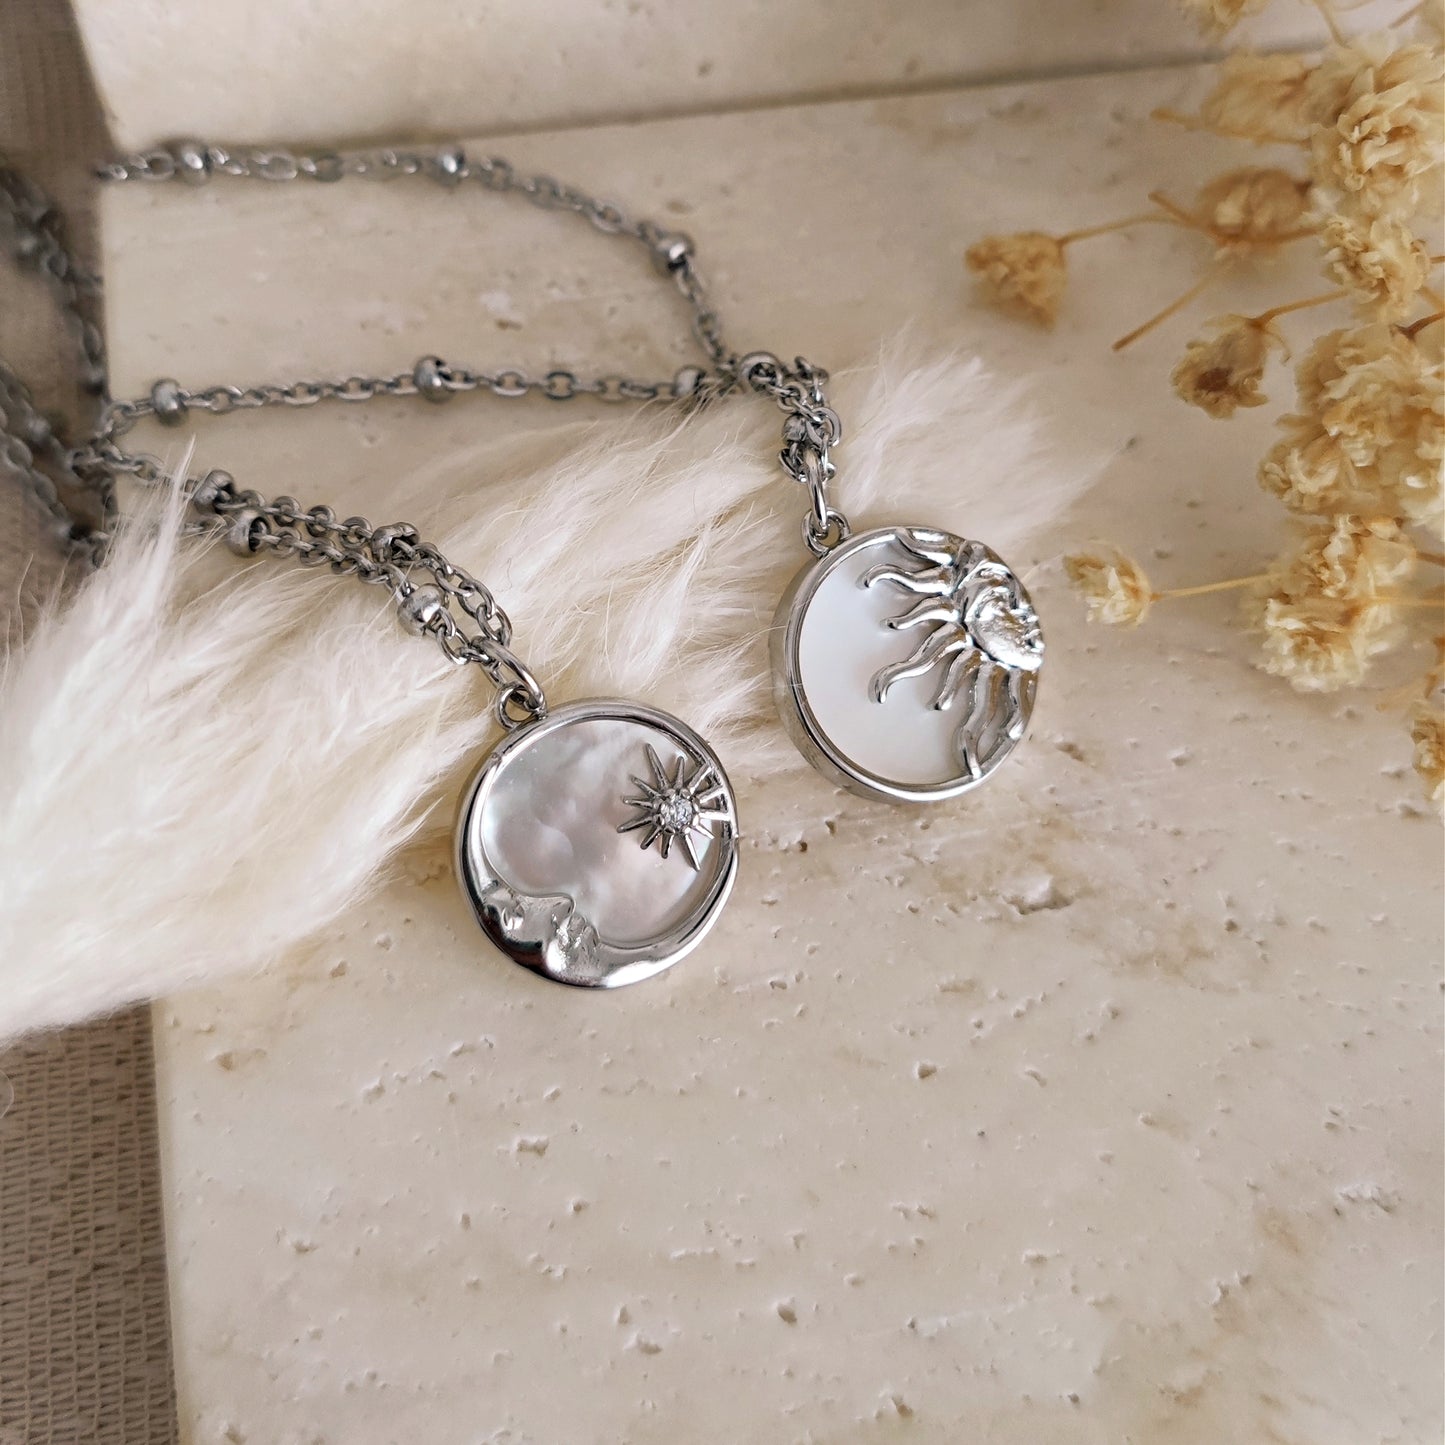 Platinum Plated Sun and Moon Pendant Necklaces, Stars & Celestial Necklaces, Mother of Pearl Dainty Necklace